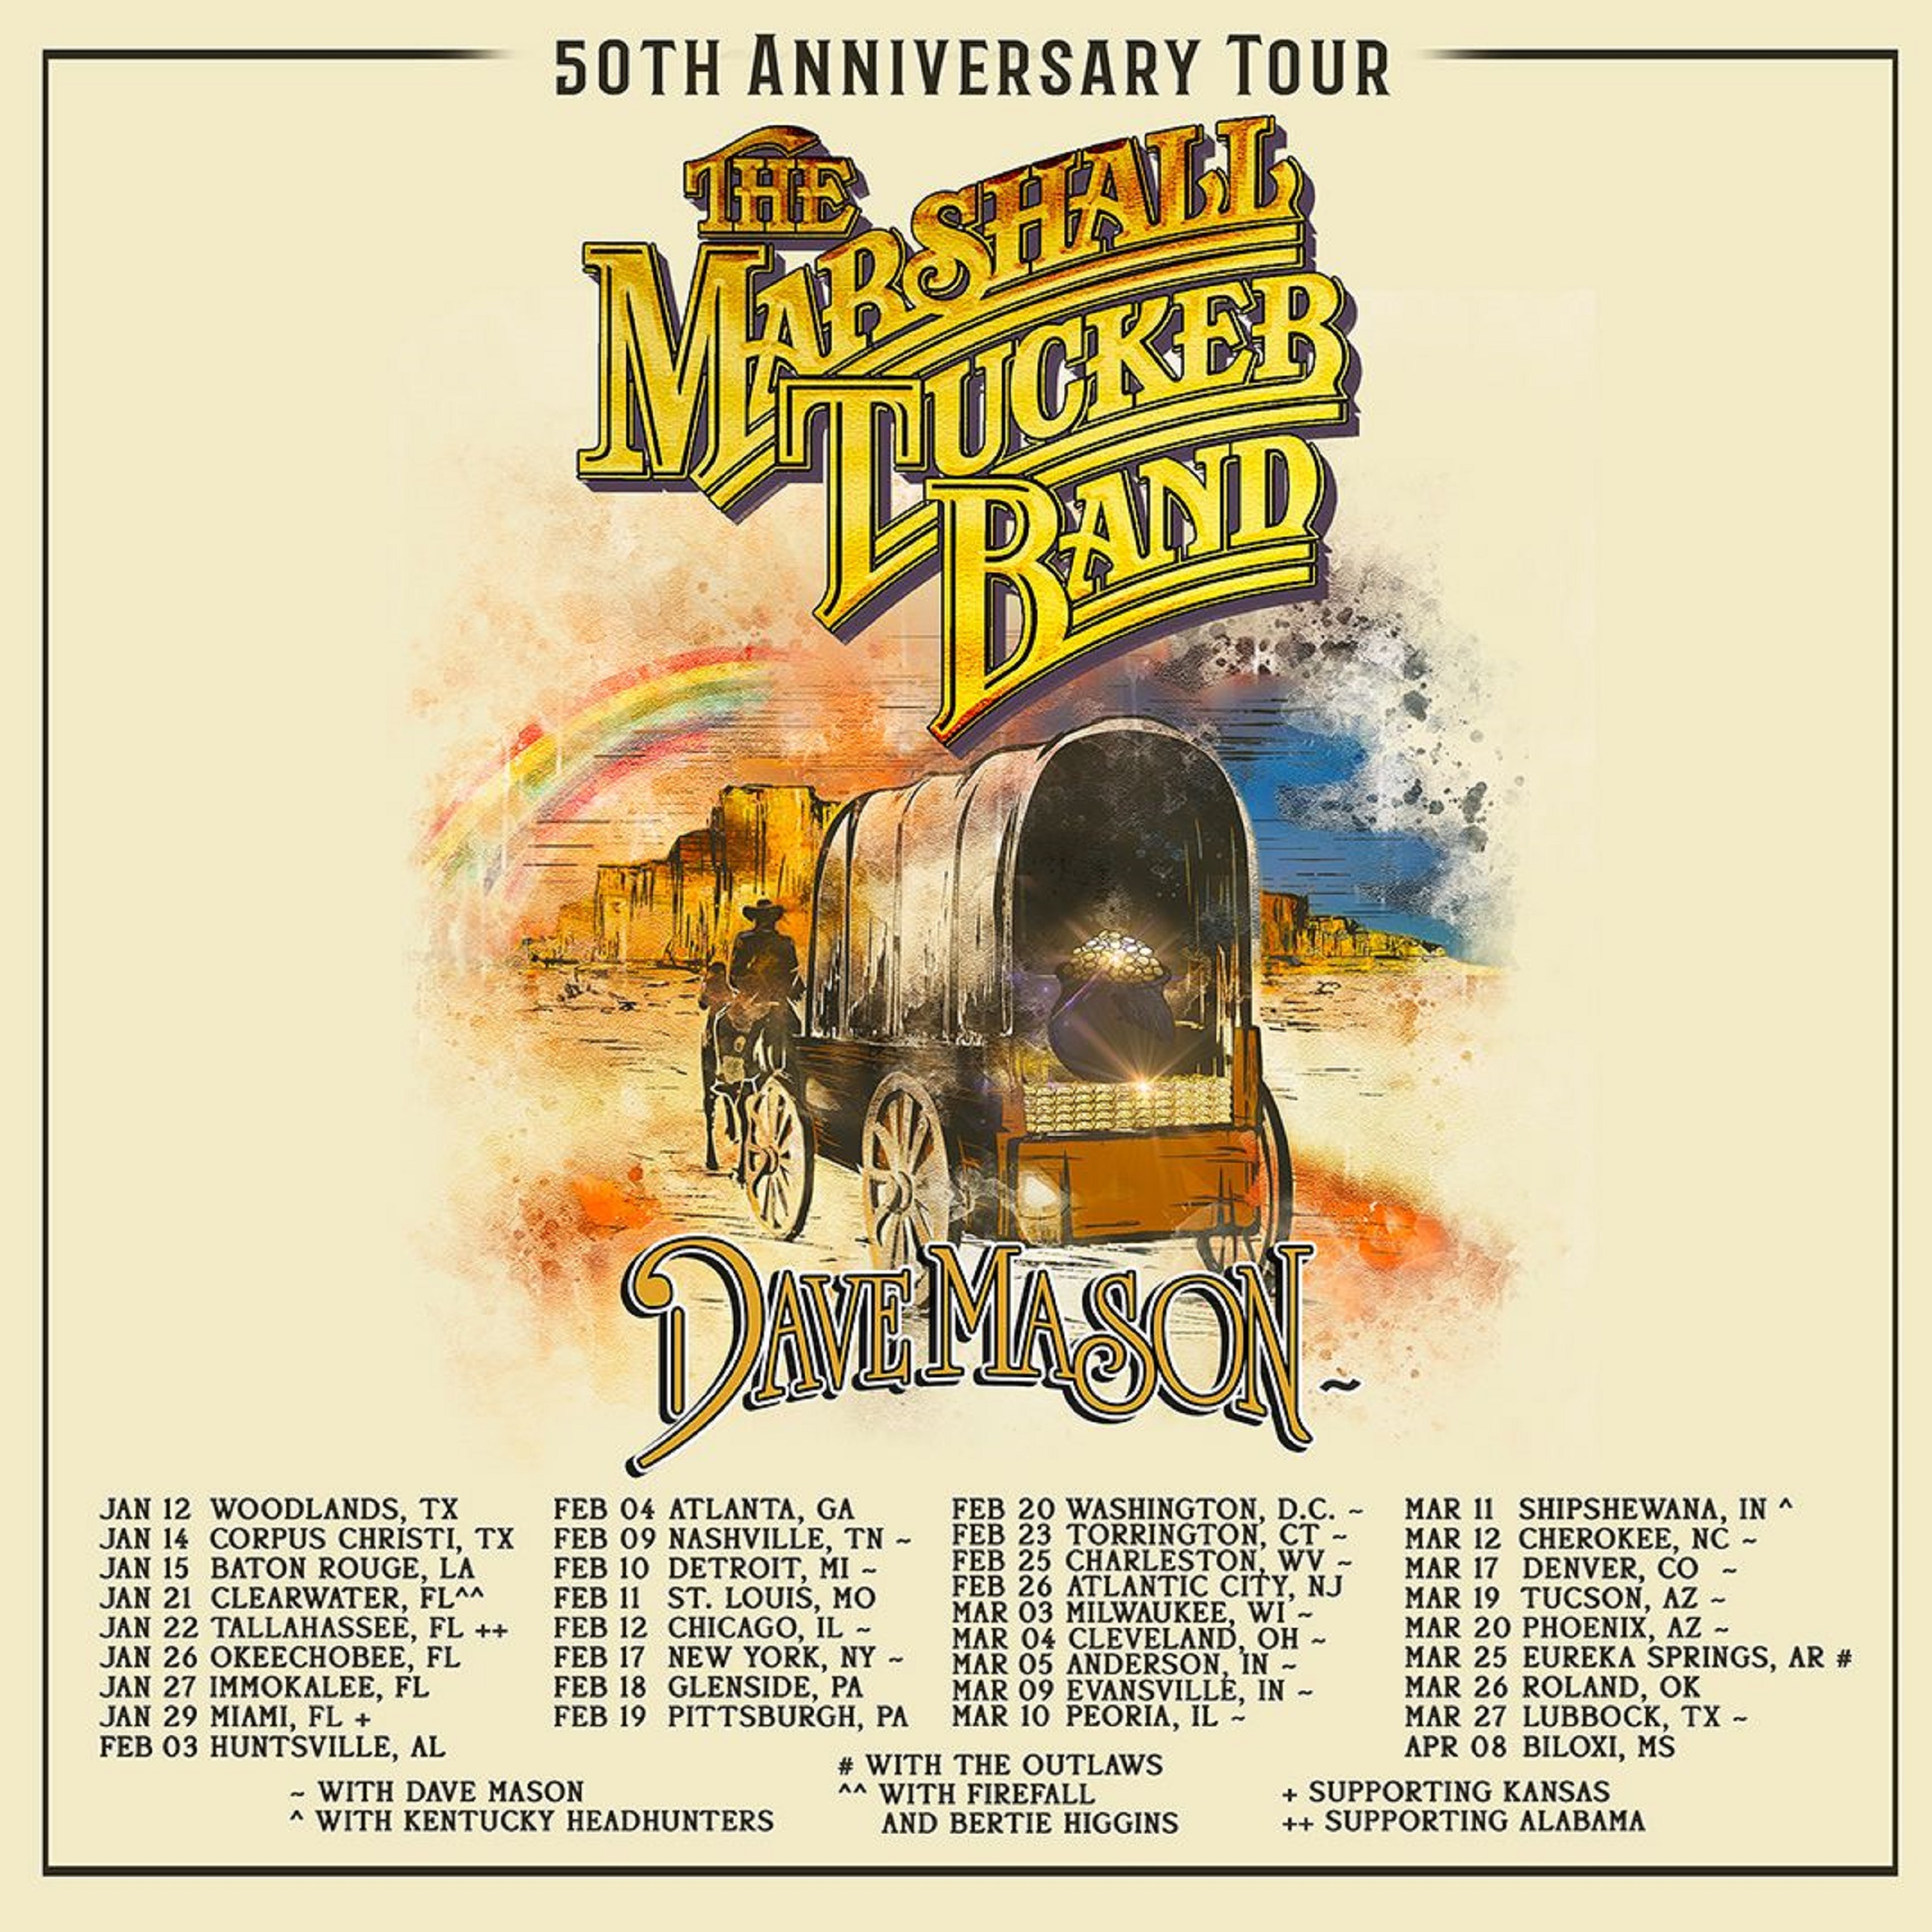 THE MARSHALL TUCKER BAND ANNOUNCES HISTORIC "50TH ANNIVERSARY TOUR" 